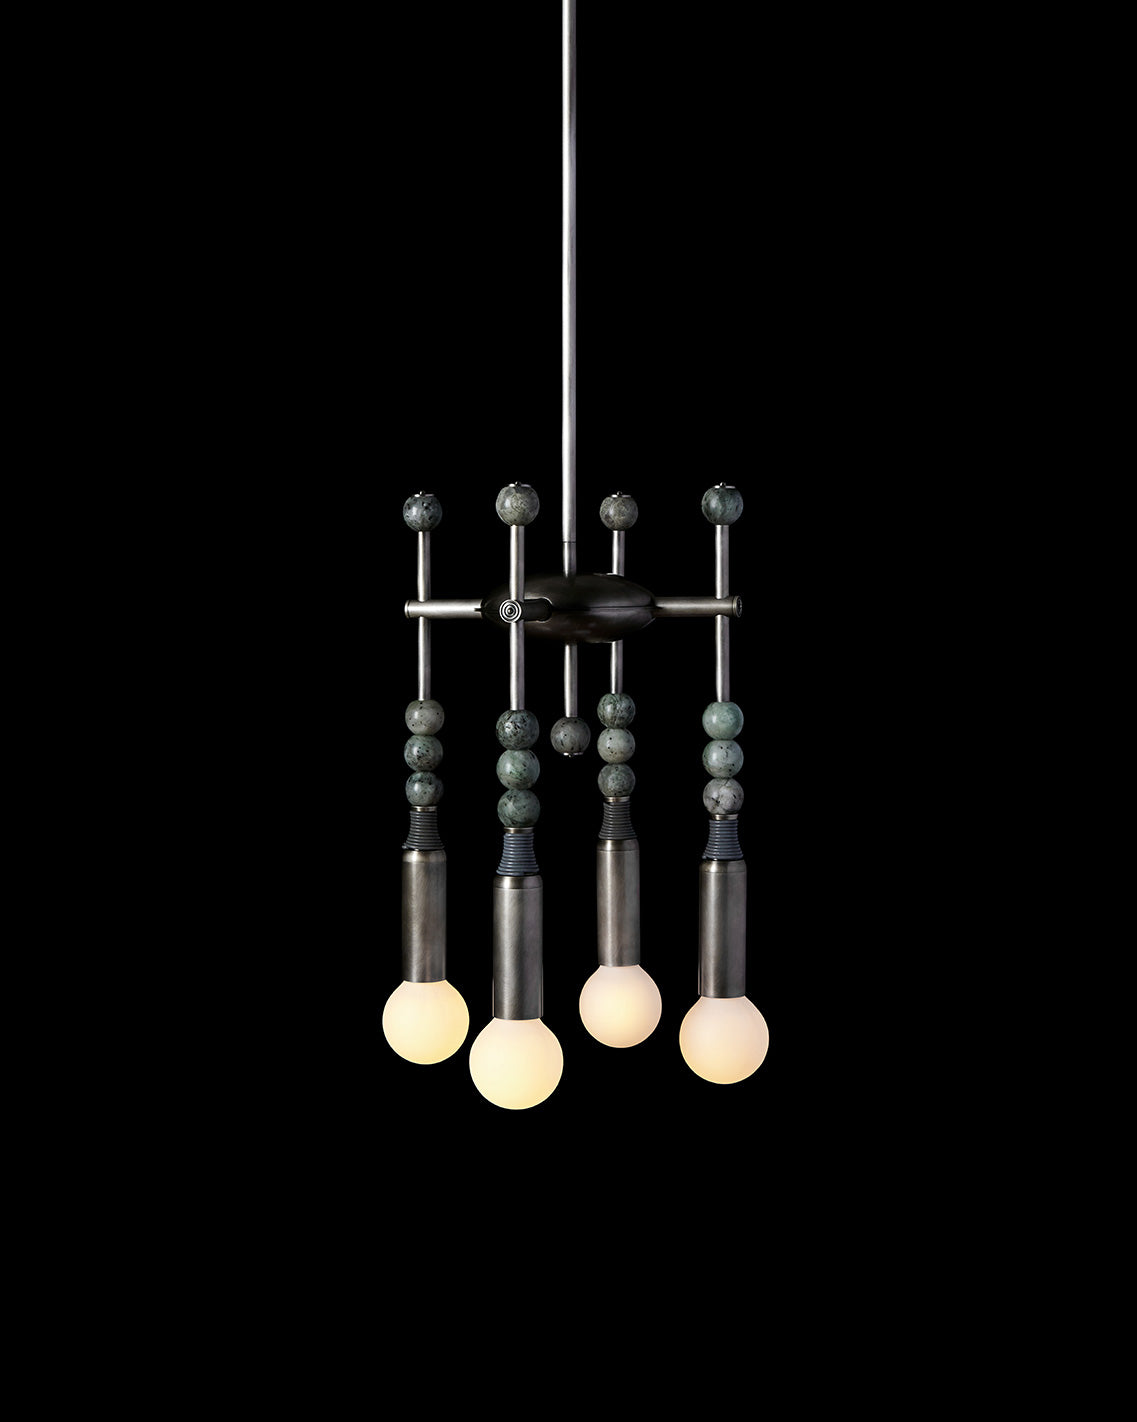 TALISMAN : 4 chandelier in Tarnished Silver and Cool Gray Leather with Jade stone, against a black background. 